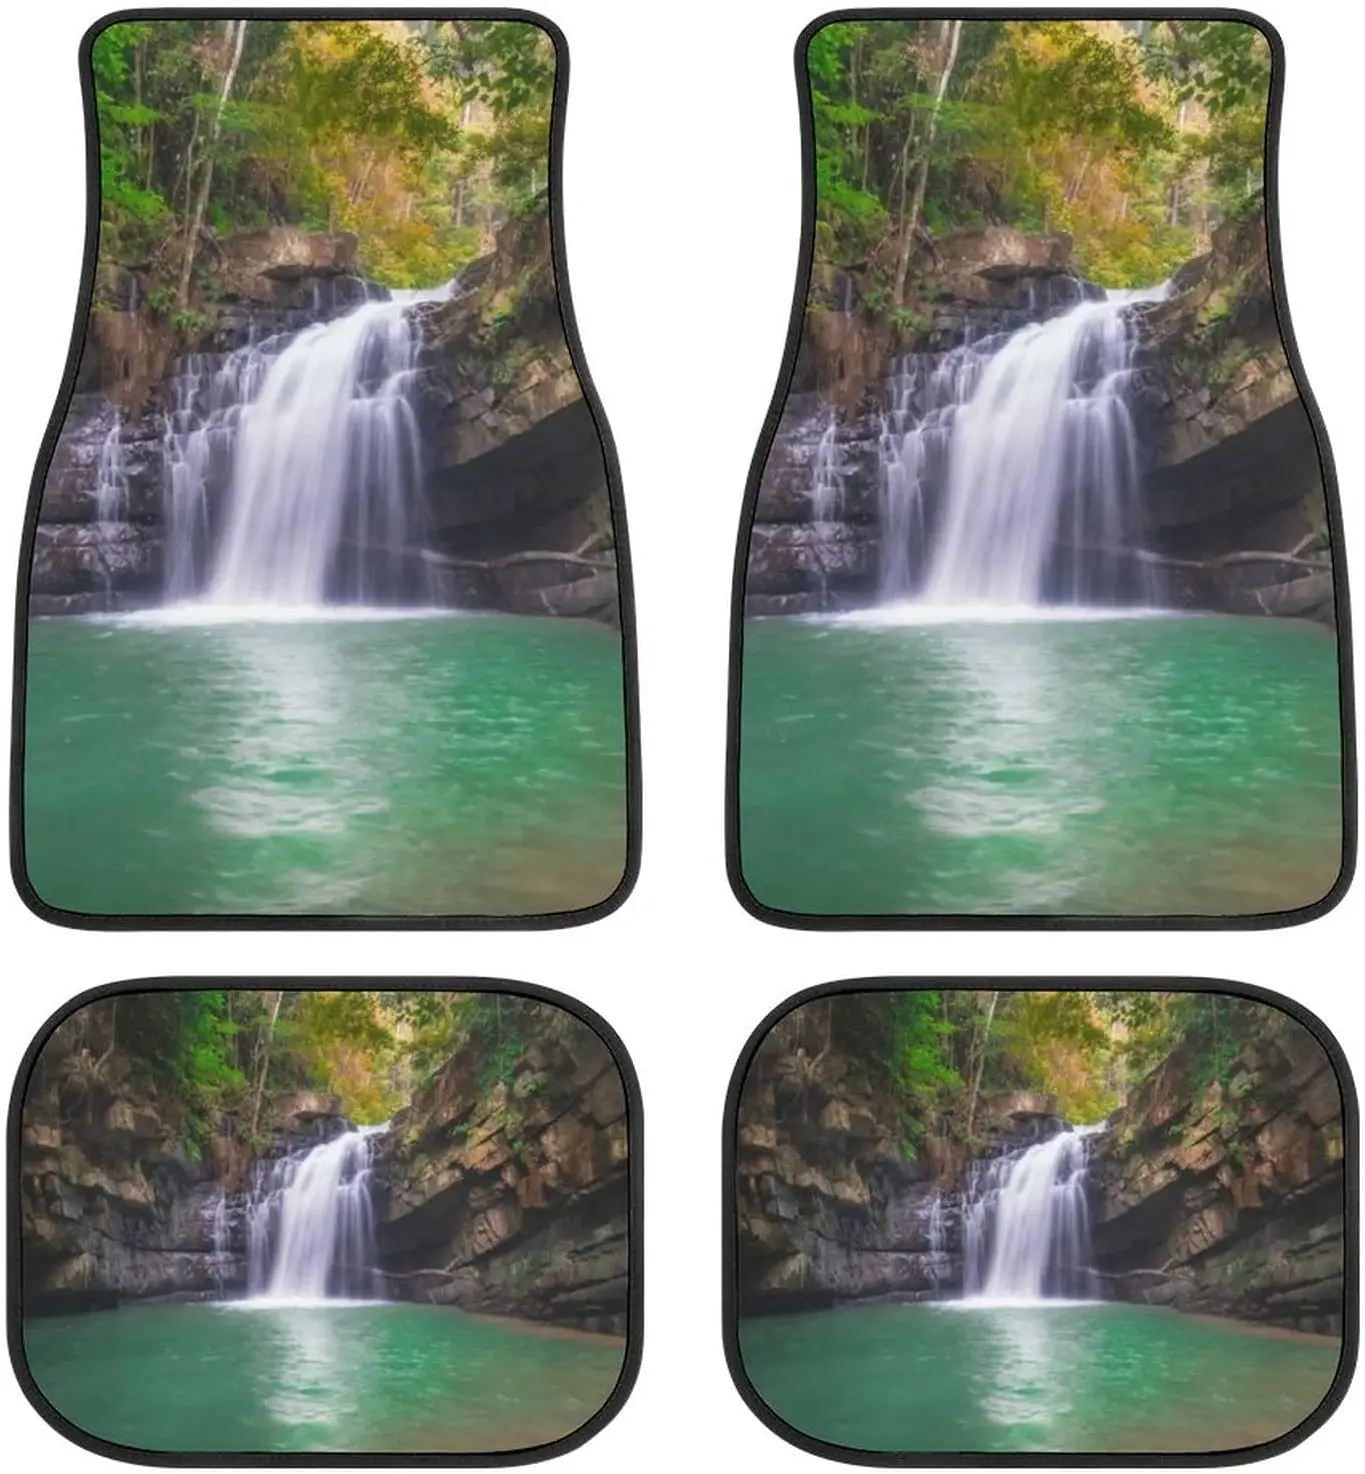 

Scenery Forest Waterfall Mountain Car Mats Universal Drive Seat Carpet Vehicle Interior Protector Mats Funny Designs All-Weather